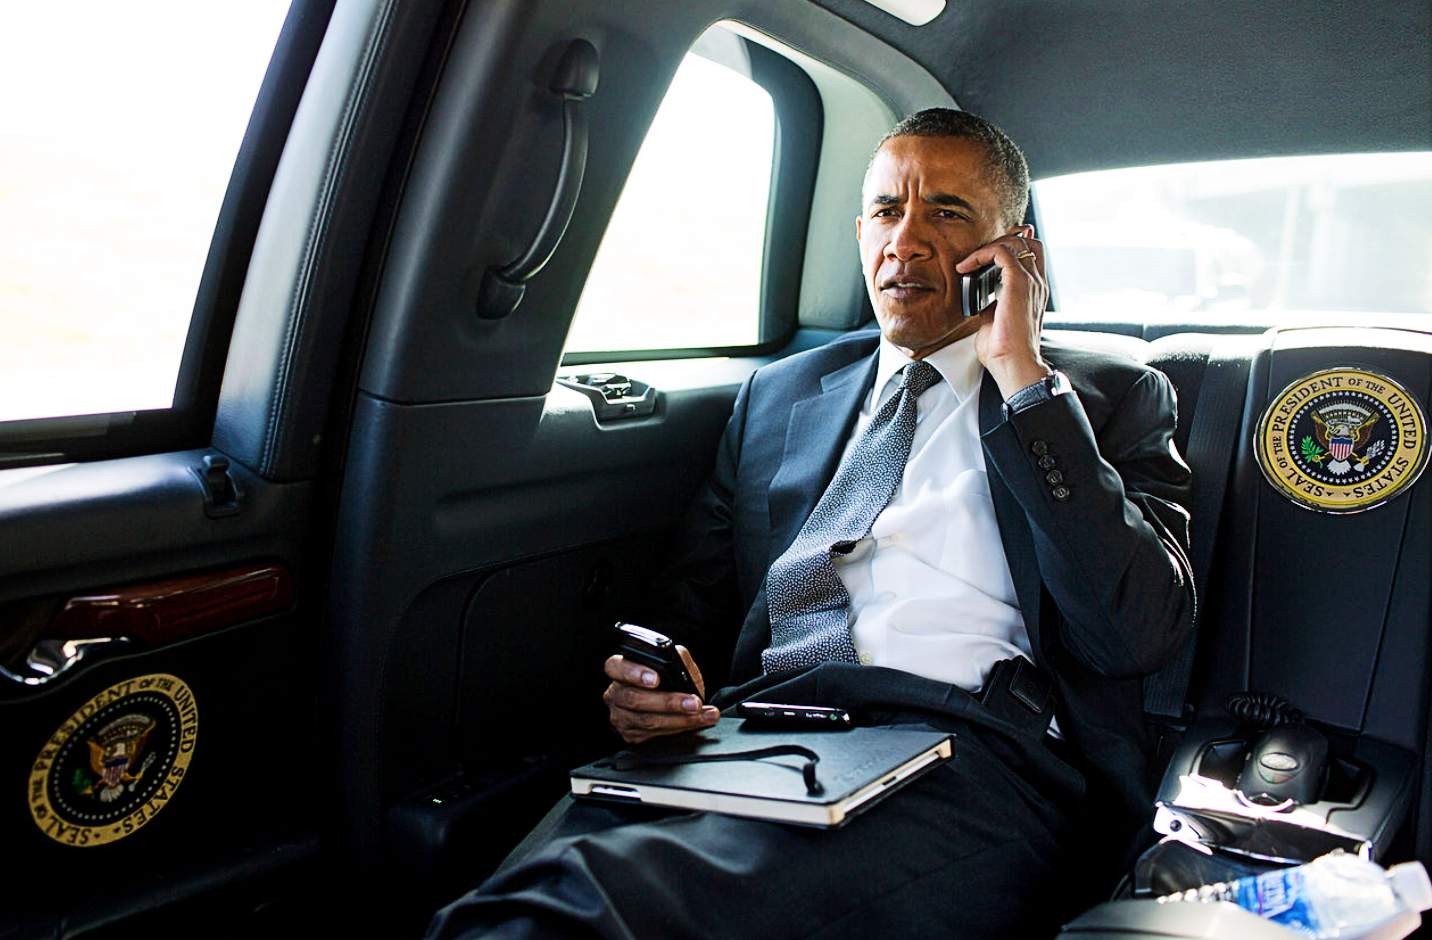 The US President's vehicle known as The Beast where Barack Obama is working